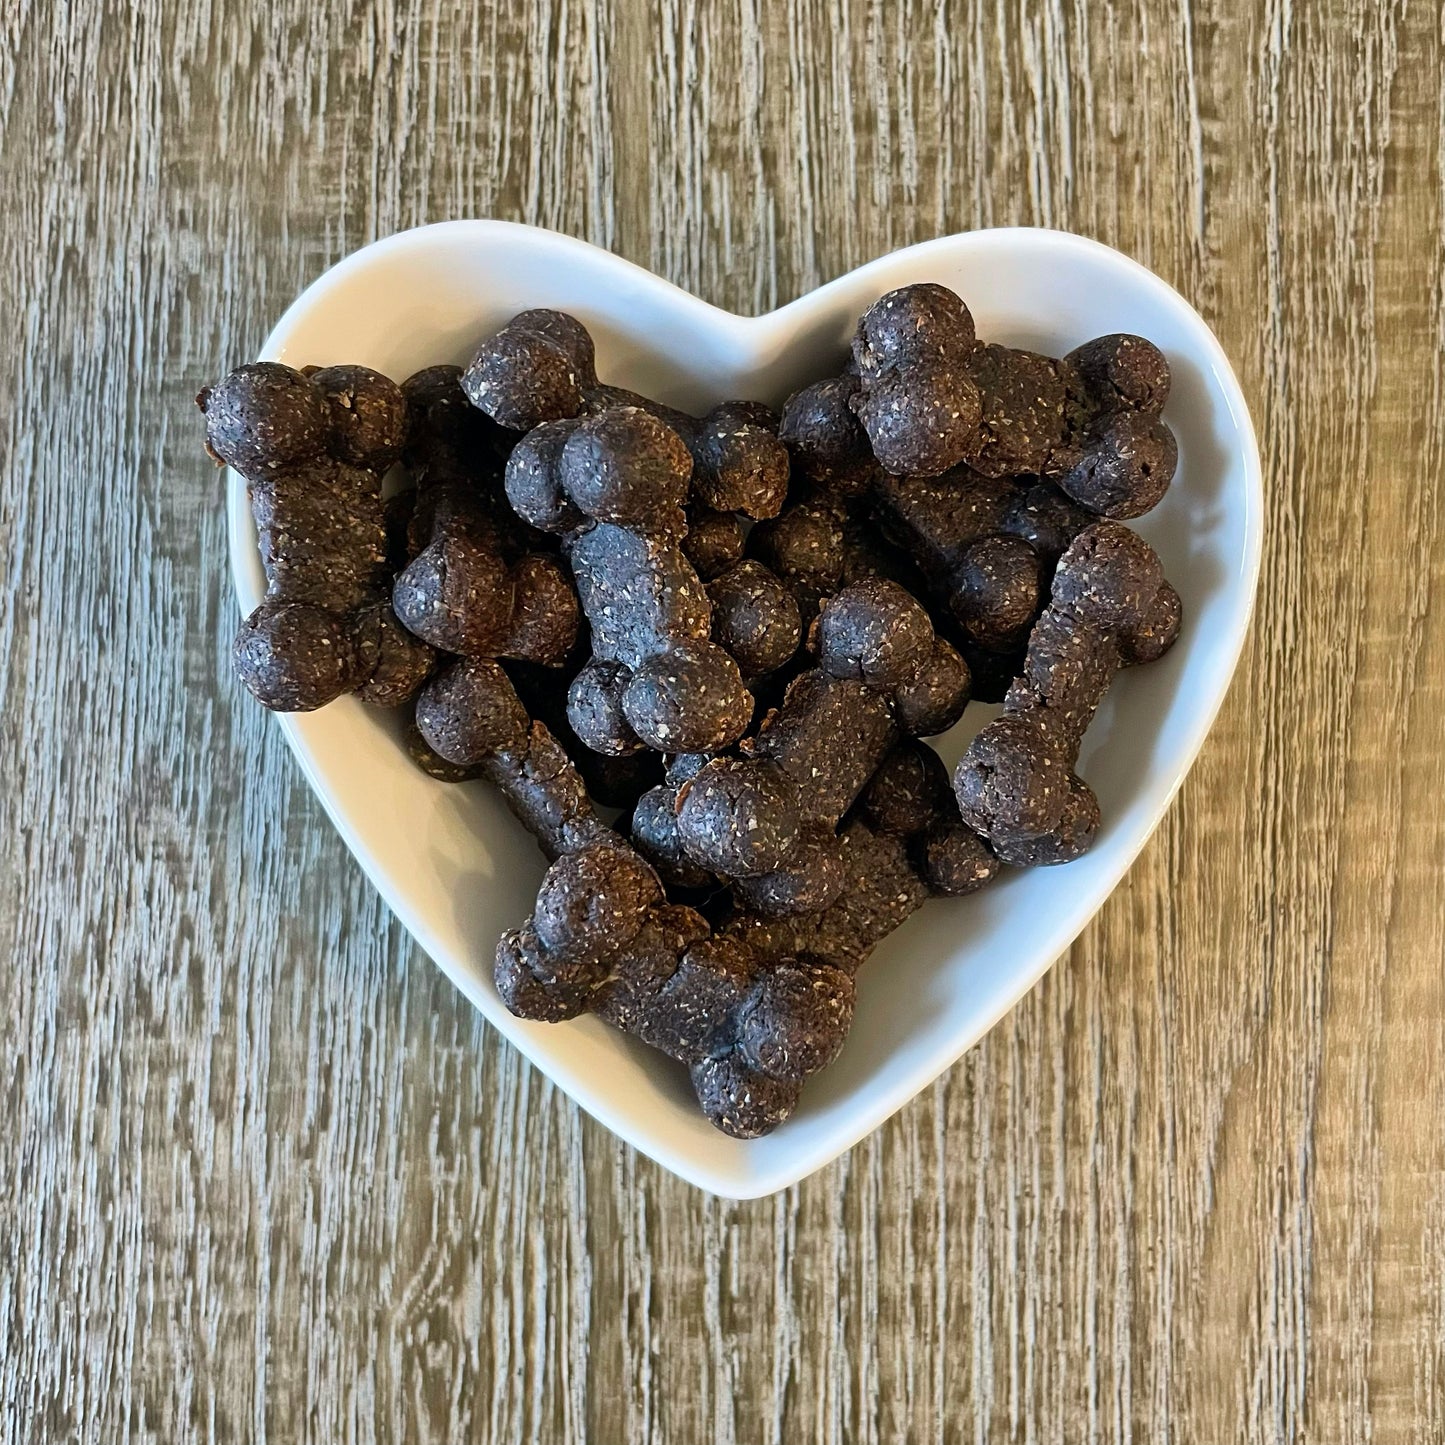 A heart-shaped white bowl filled with dark brown dog bone-shaped cookies.